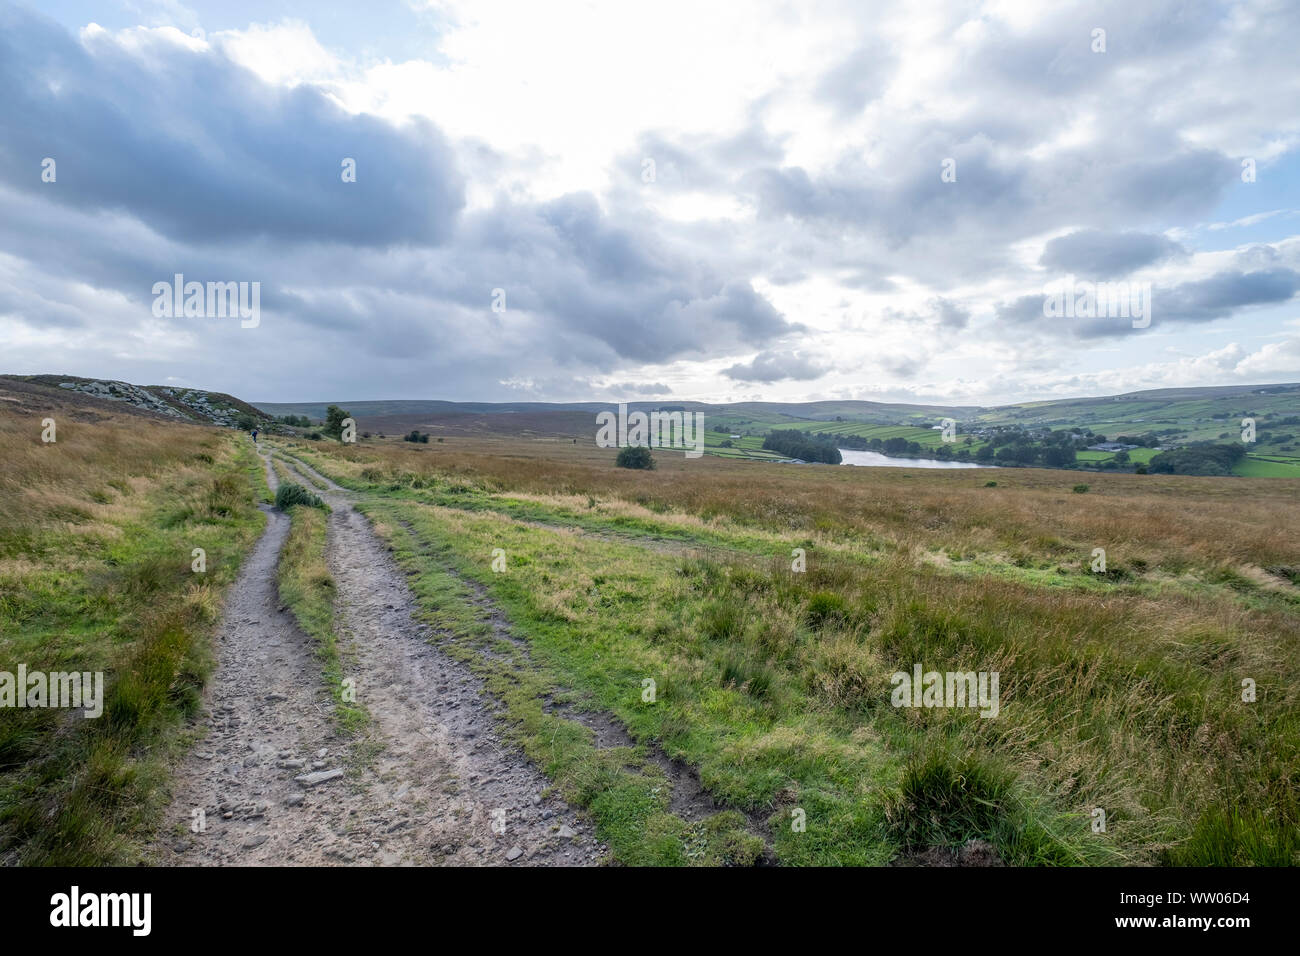 Penistone Hill Country Park, vicino Haworth nel West Yorkshire, Inghilterra Foto Stock